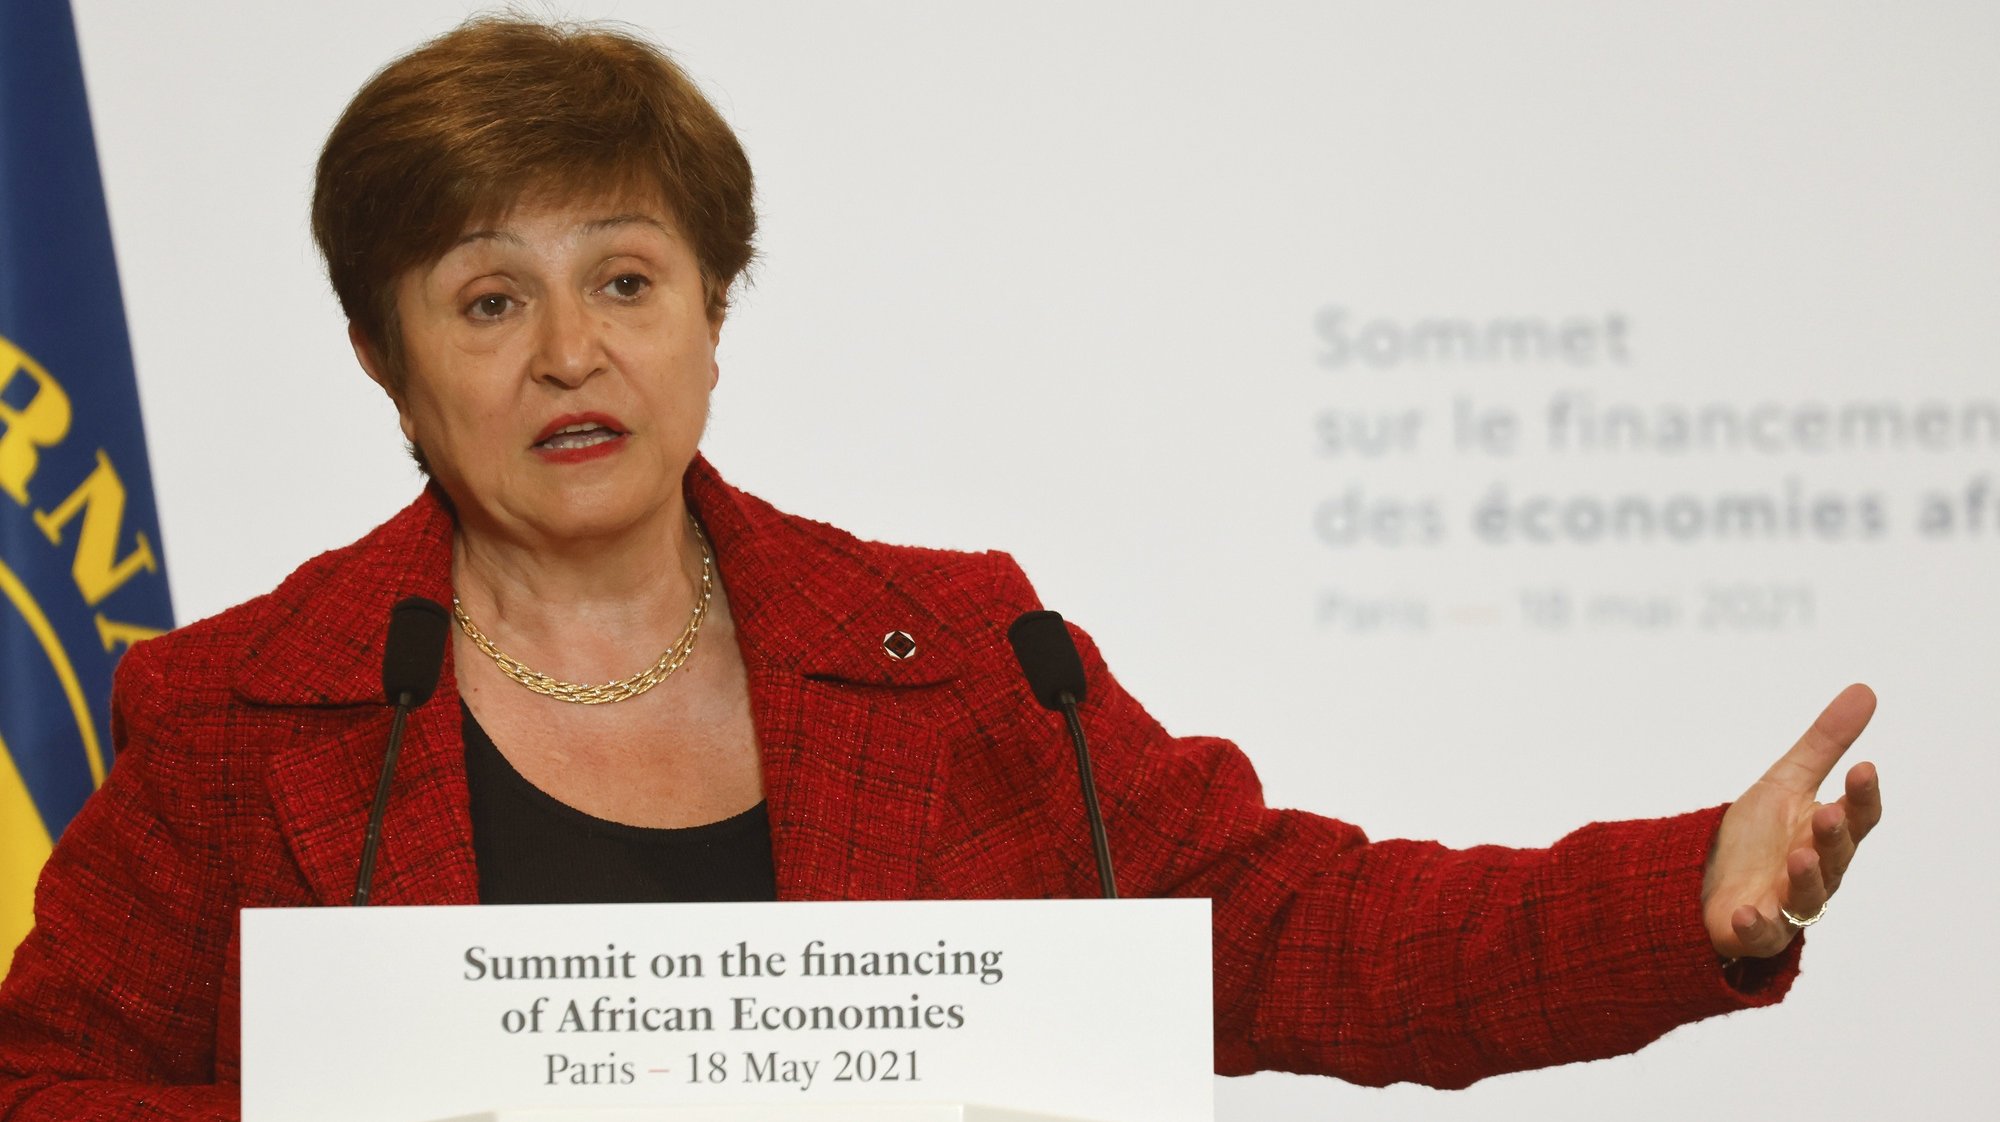 epa09210136 International Monetary Fund (IMF) Managing Director Kristalina Georgieva speaks during a joint press conference at the end of the Summit on the Financing of African Economies in Paris, France, 18 May 2021.  EPA/LUDOVIC MARIN / POOL  MAXPPP OUT